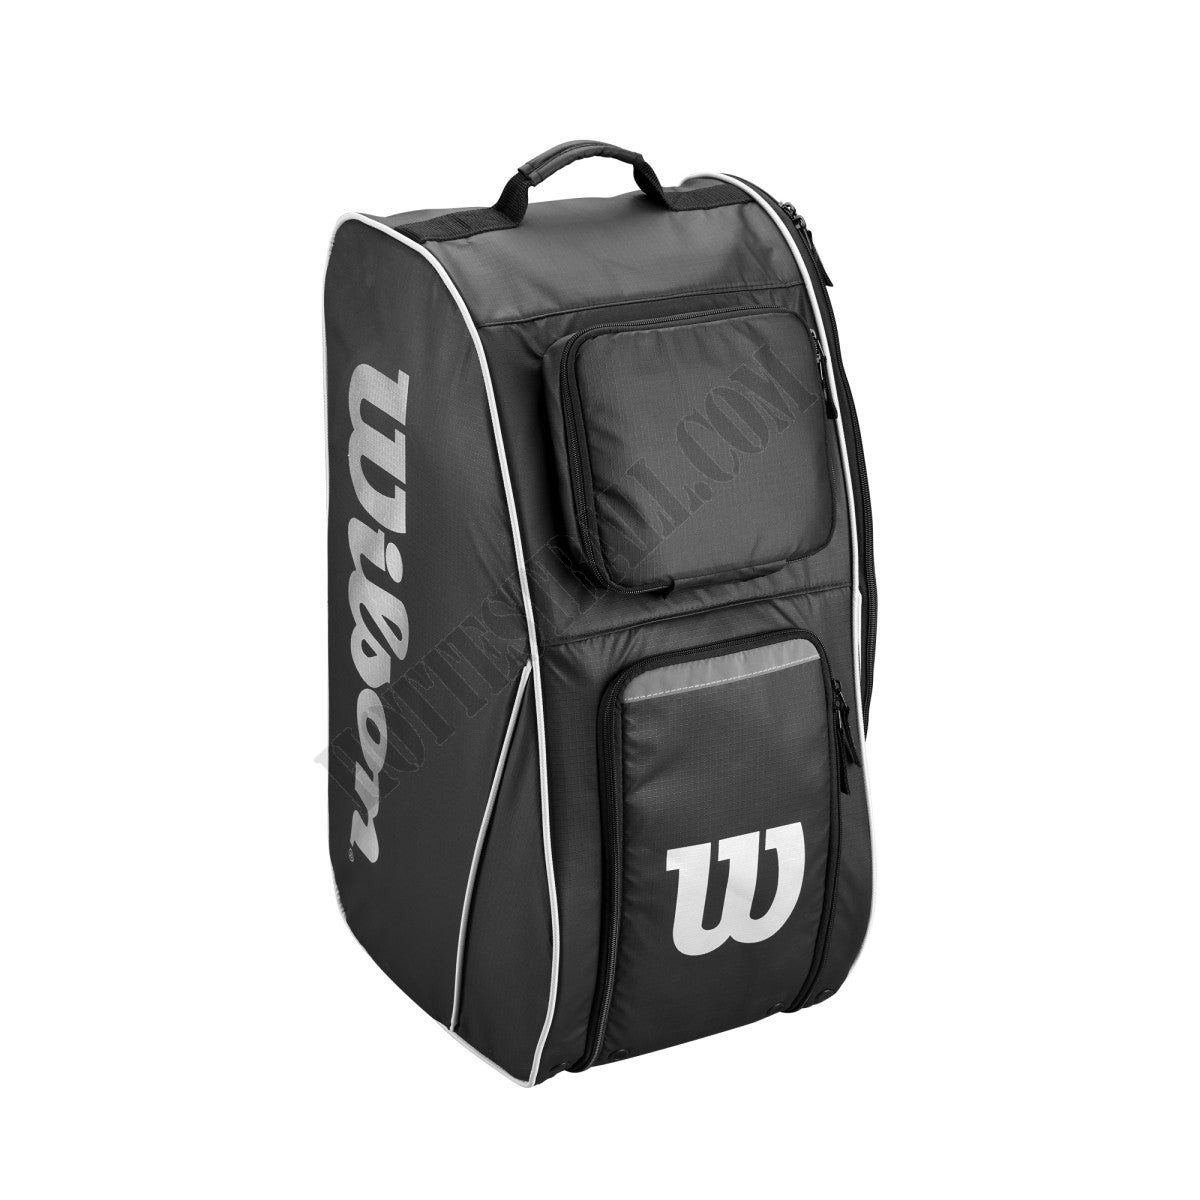 Tackle Football Player Equipment Bag - Wilson Discount Store - -0